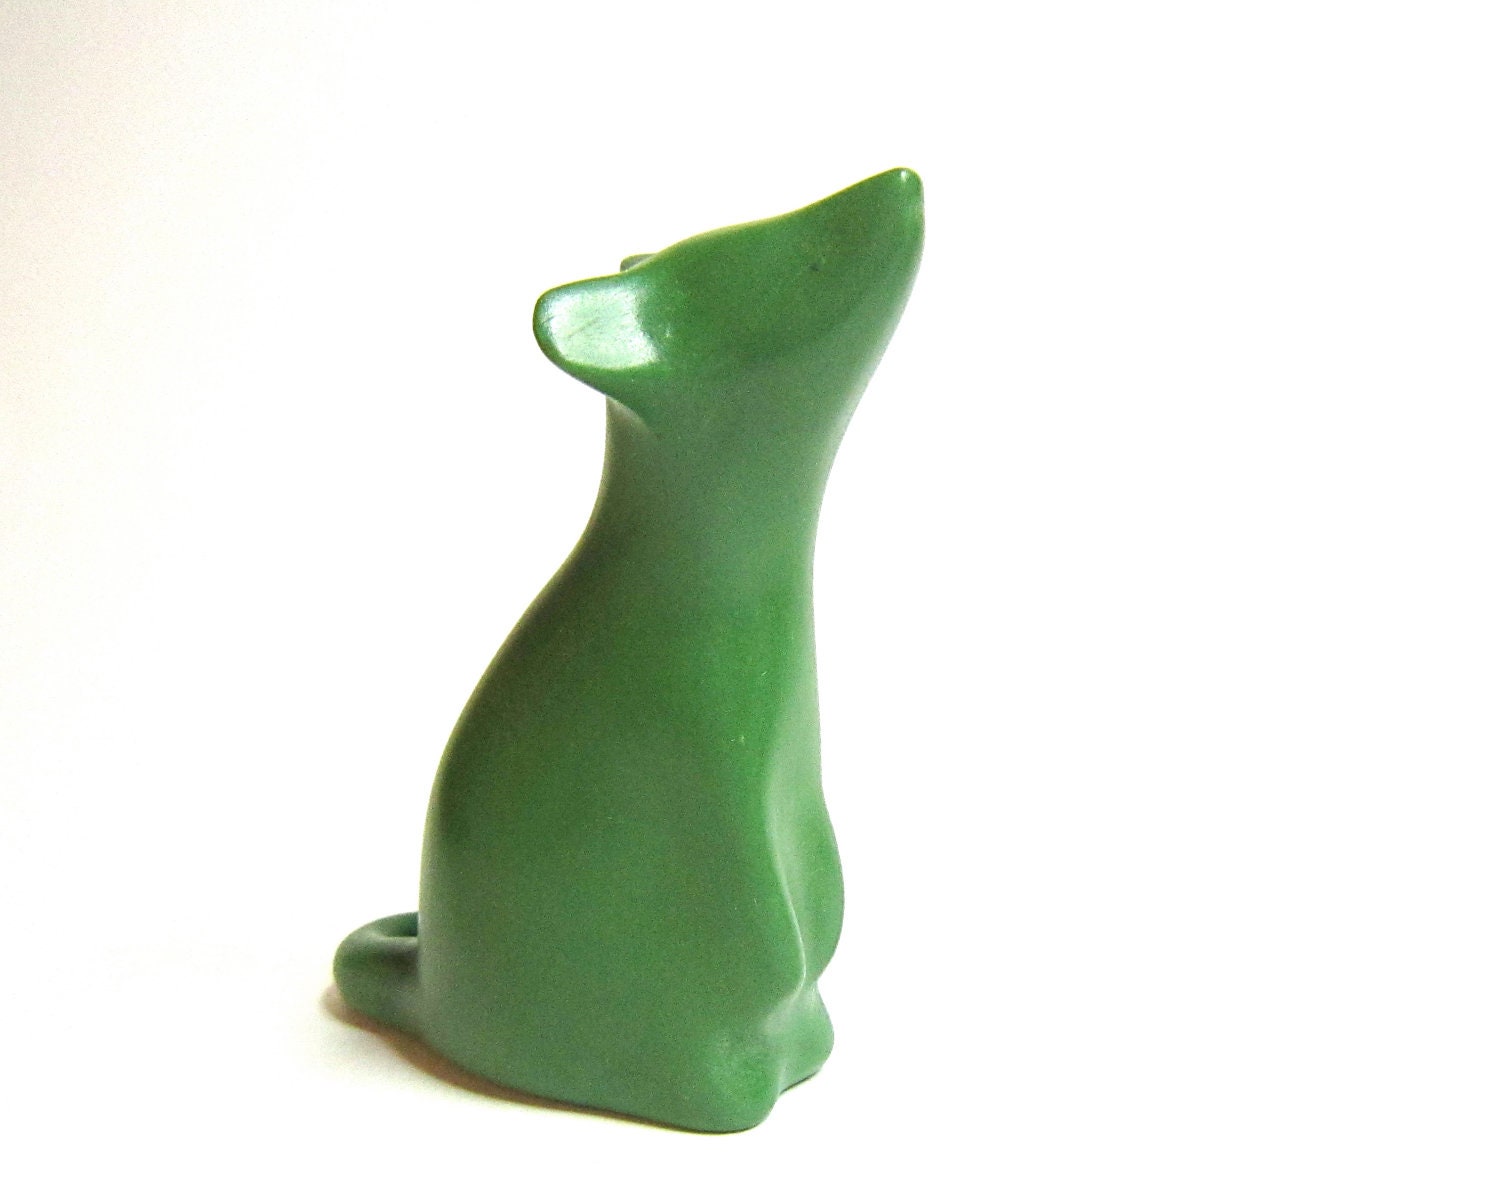 Pea little green mouse polymer clay sculpture OOAK hand made sculpture decoration